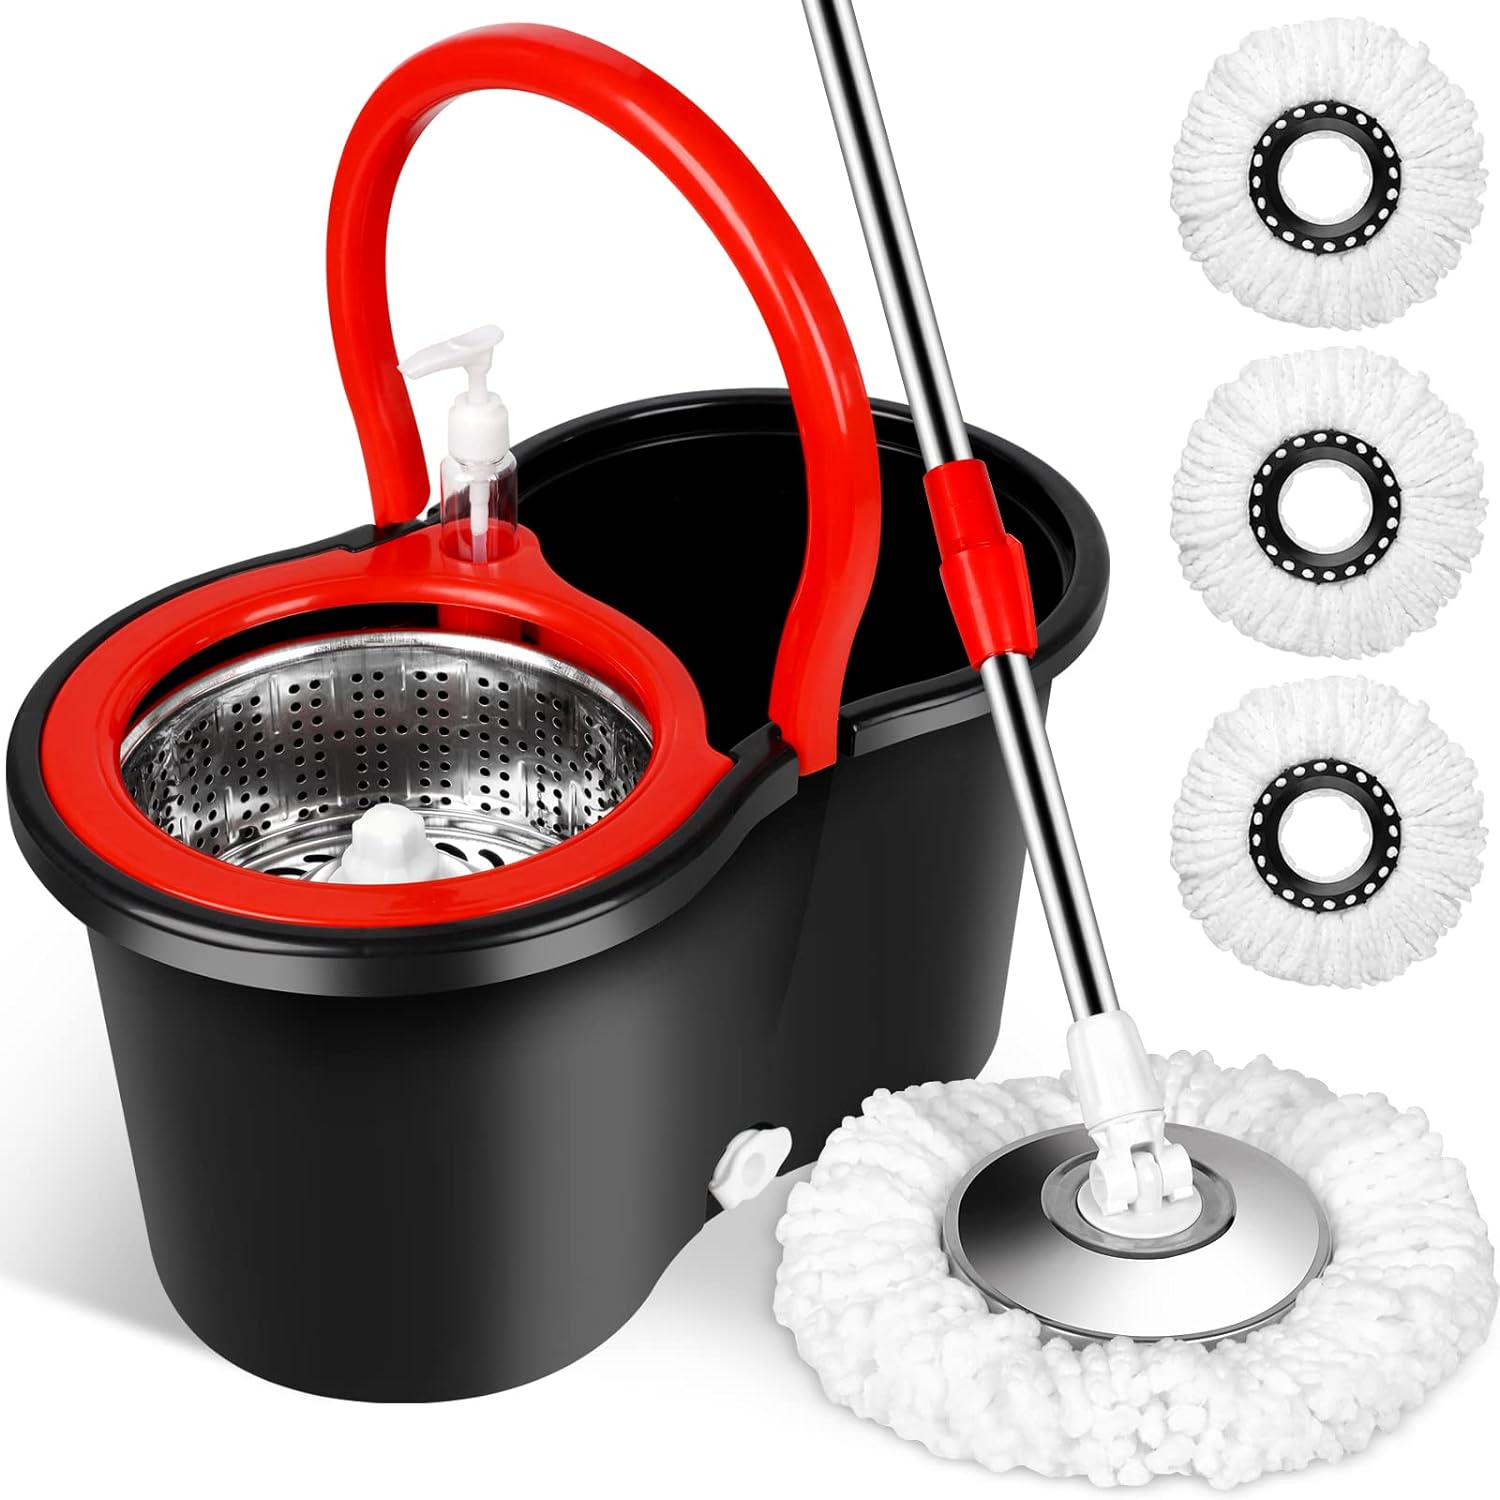 

Spin Mop Cleaning System With 3 Microfiber Mop Heads, Spin Mop And Bucket Set